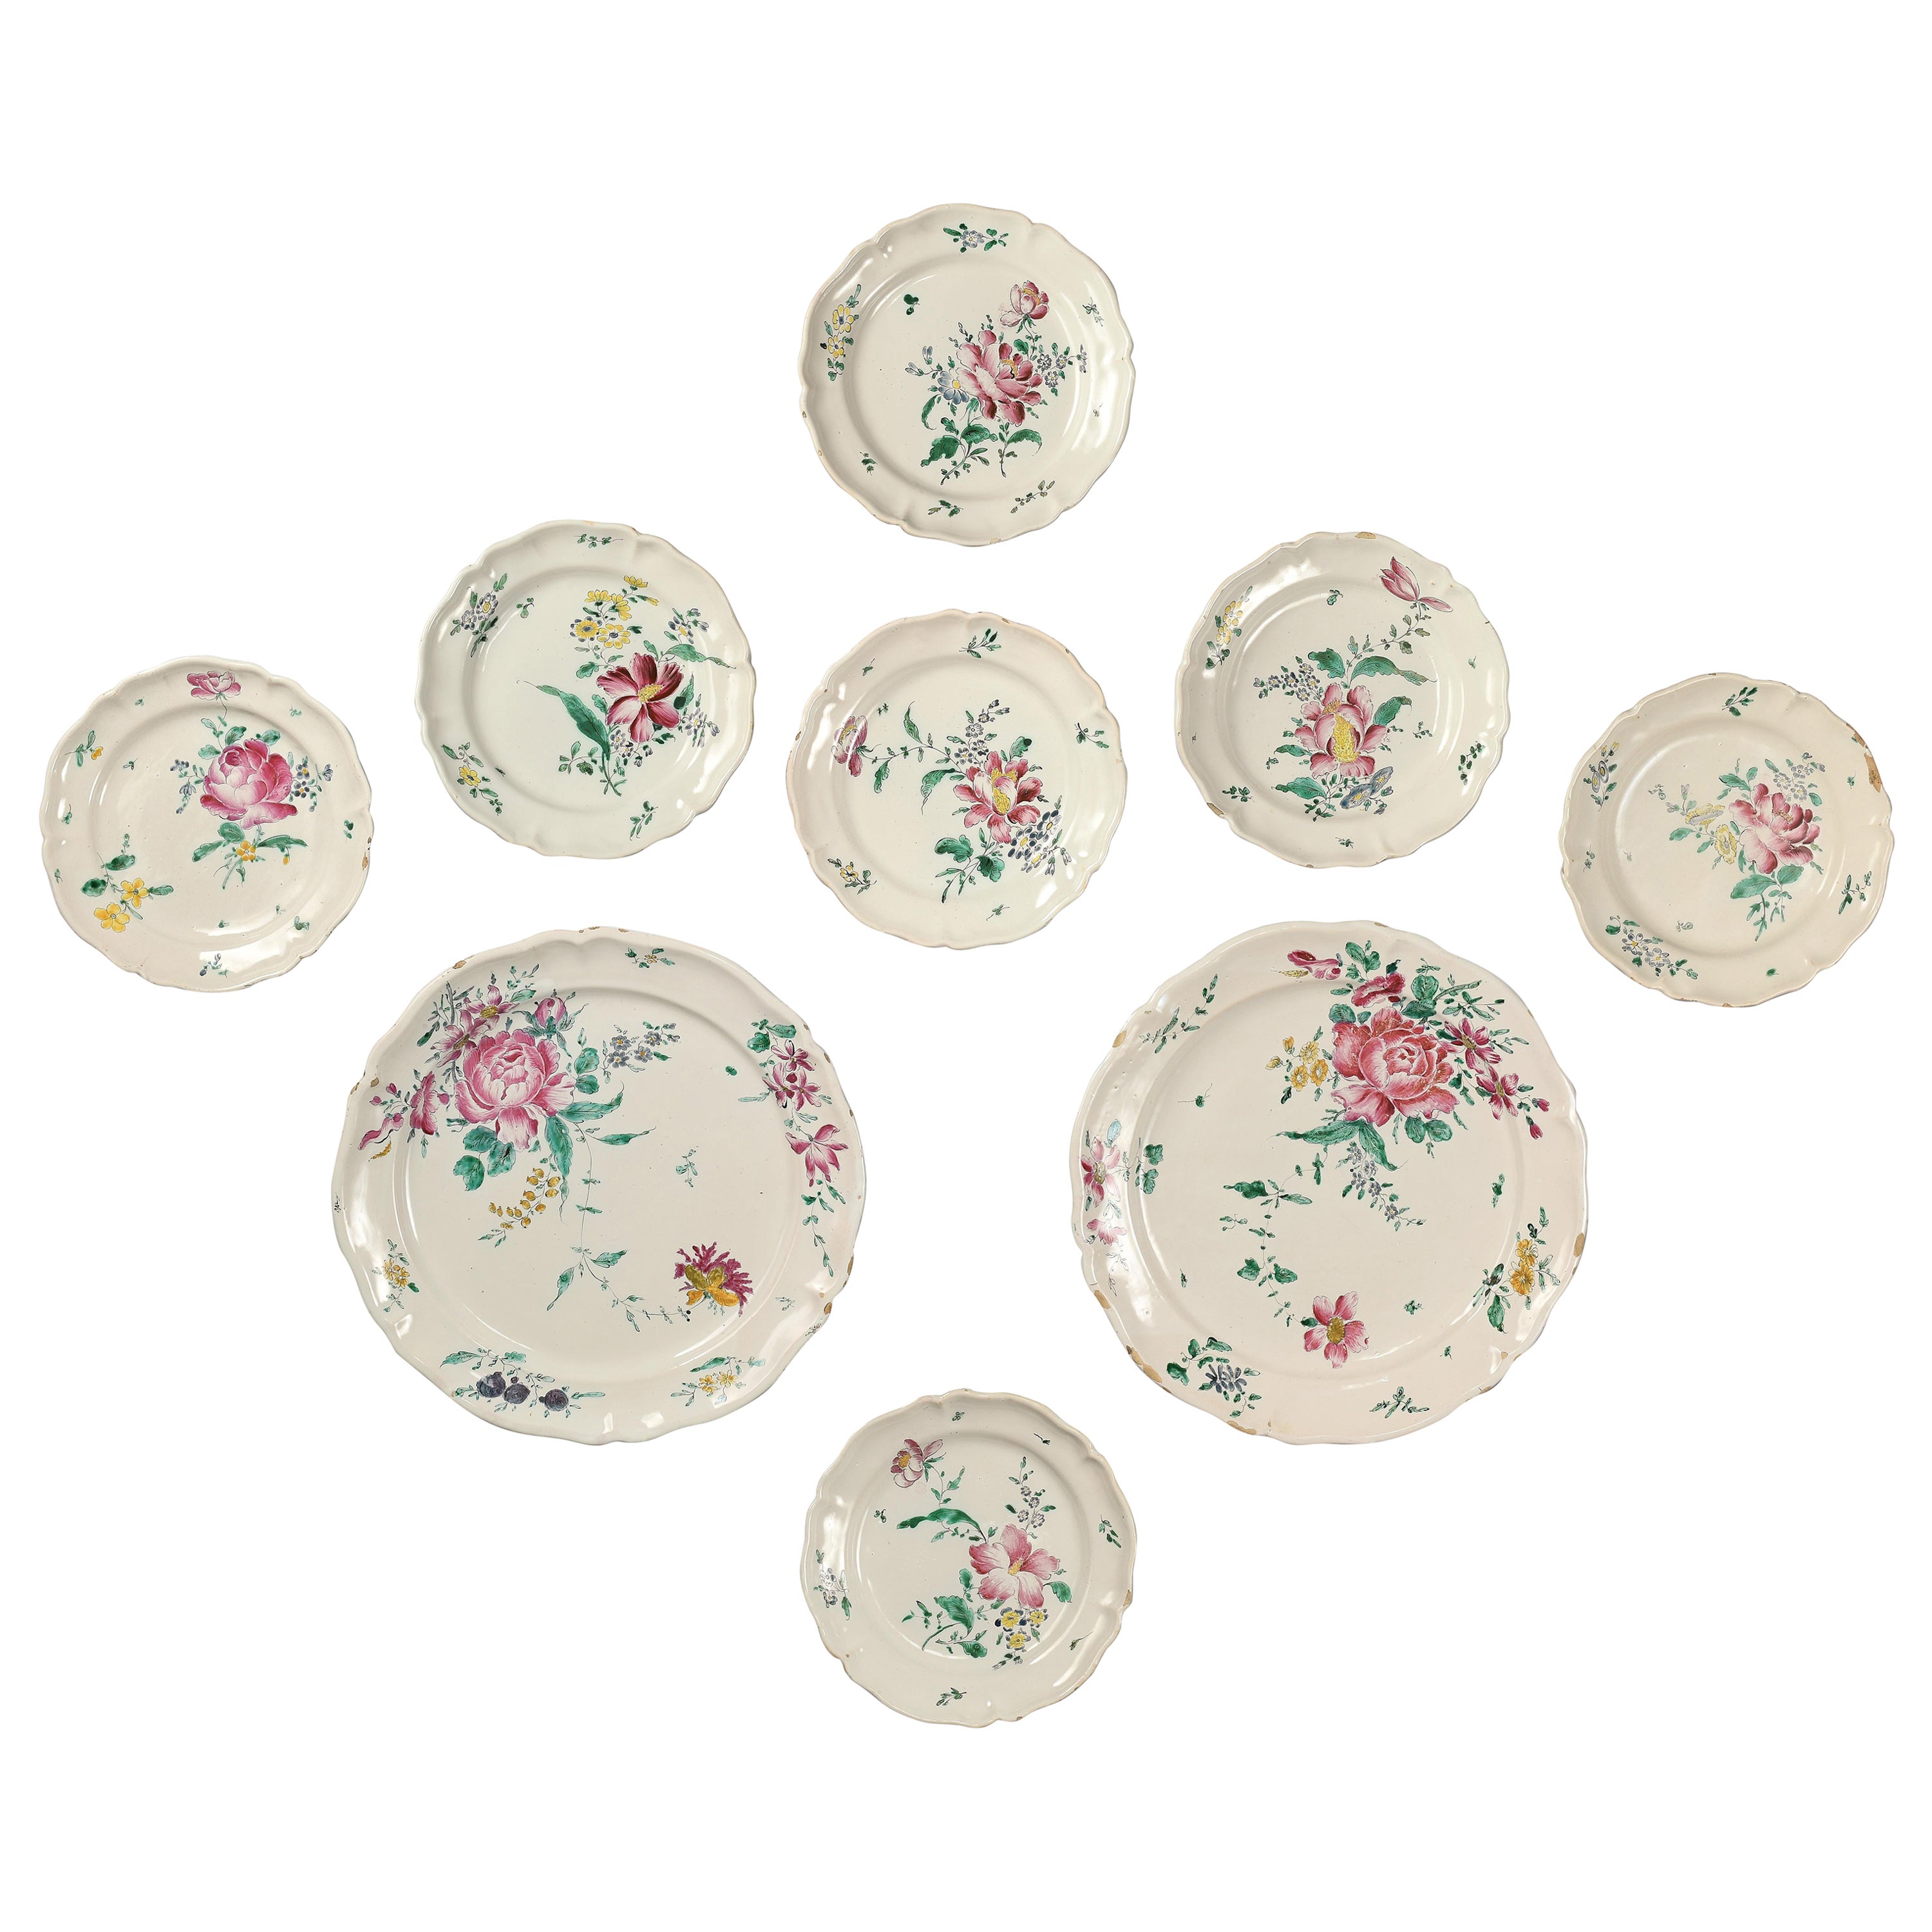 Ancient Maiolica Dishes with flowers, Lombard Manufacture, 1770-1780 Circa For Sale